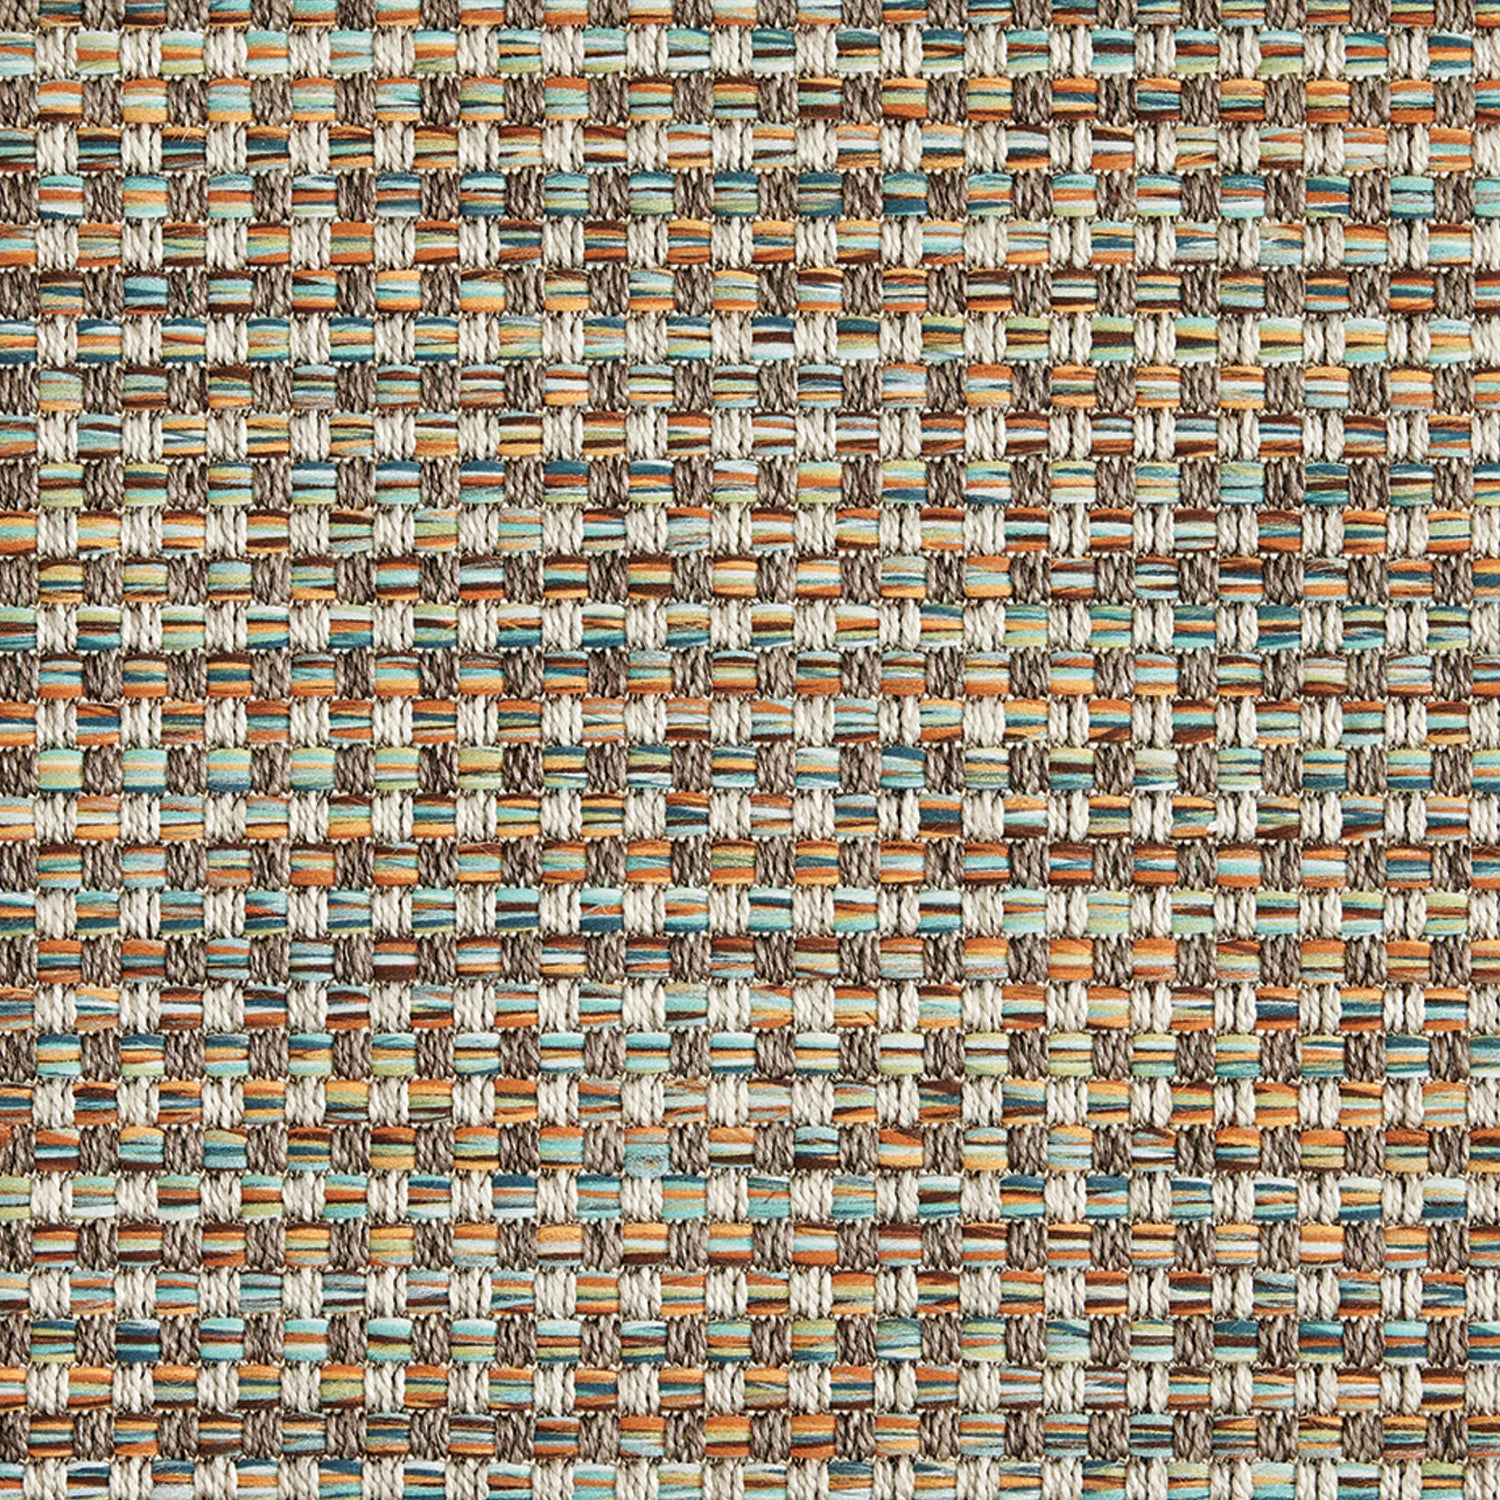 Outdoor broadloom carpet swatch in a large-scale grid weave in shades of brown, cream, orange and blue.